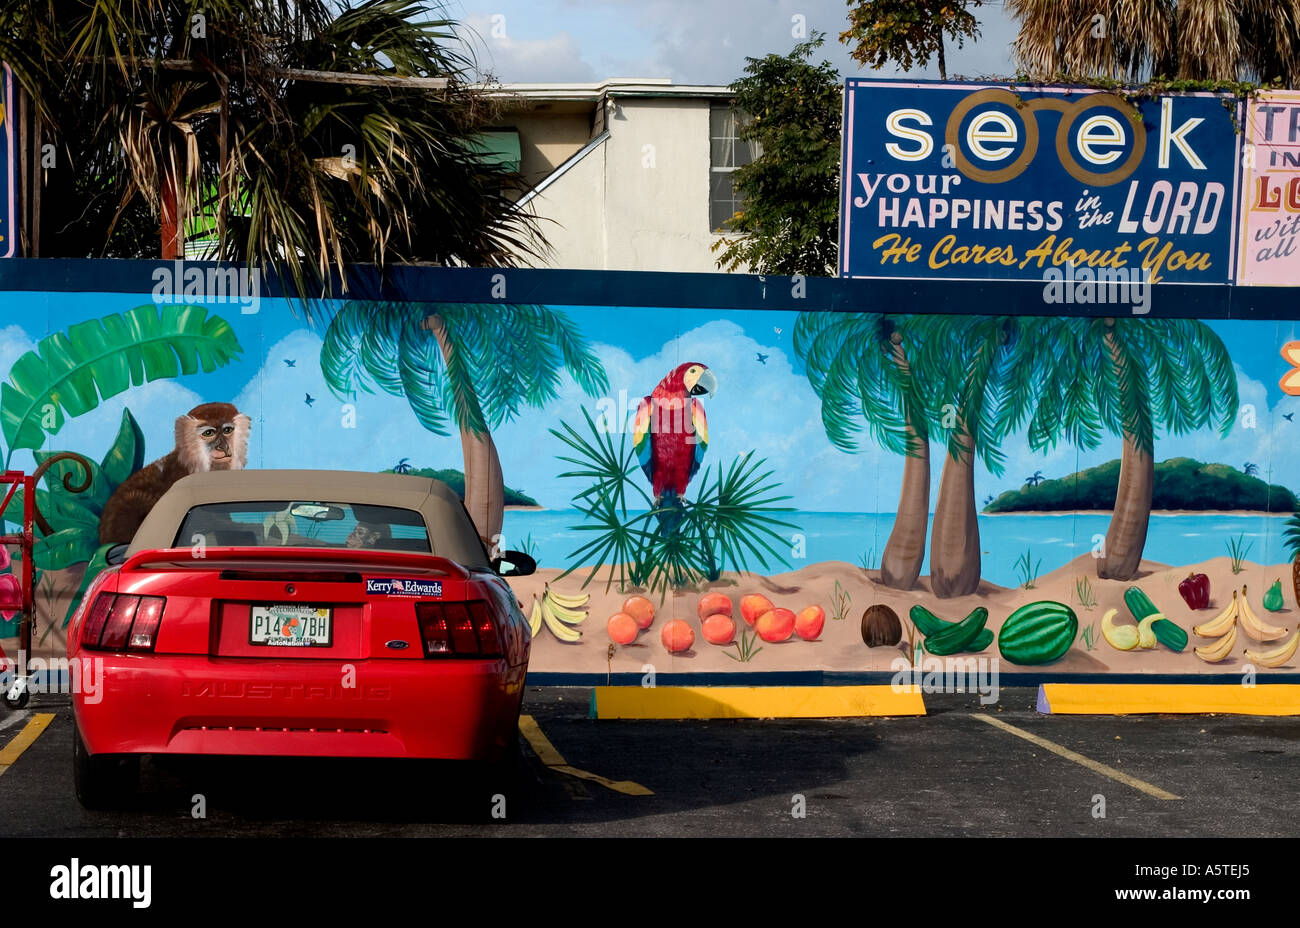 A sporty red Ford Mustang convertible is parked near a mural and sign urging people to seek happiness in the Lord. Stock Photo